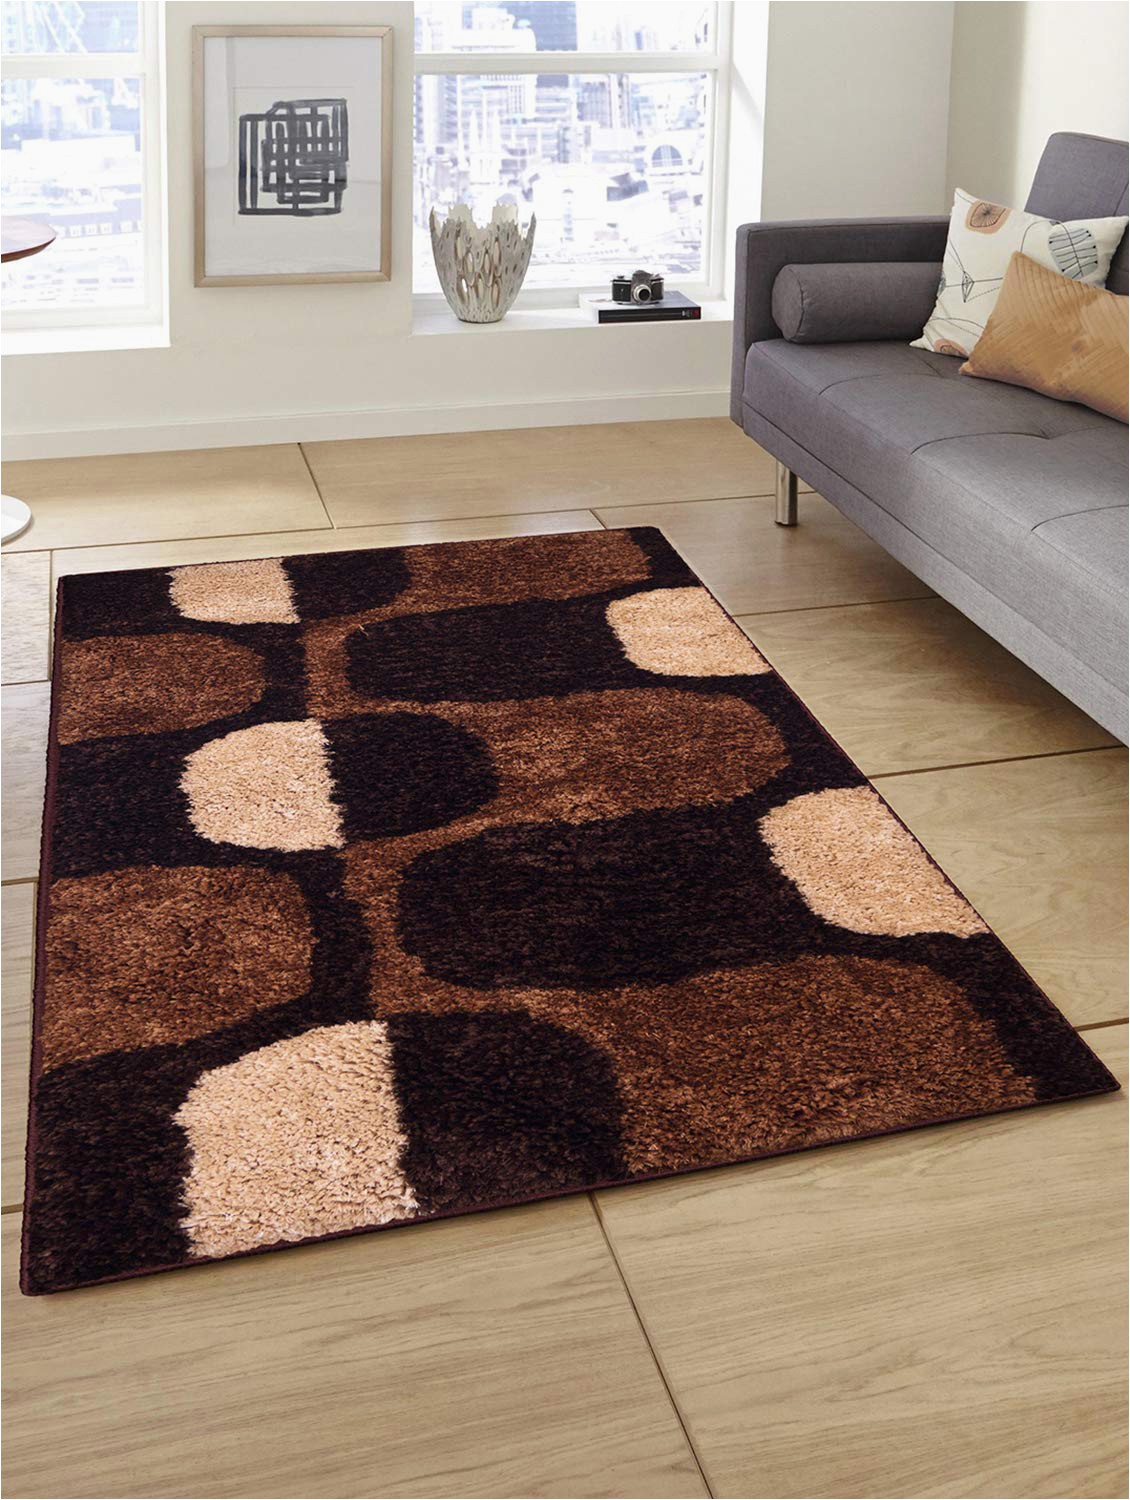 Secure area Rug to Carpet Story Home Modern Anti Skid Abstract Polyester Thick soft Shaggy area Rug Long Lasting Carpet for Bedroom Living Room Hall 3 X 5 Ft Brown